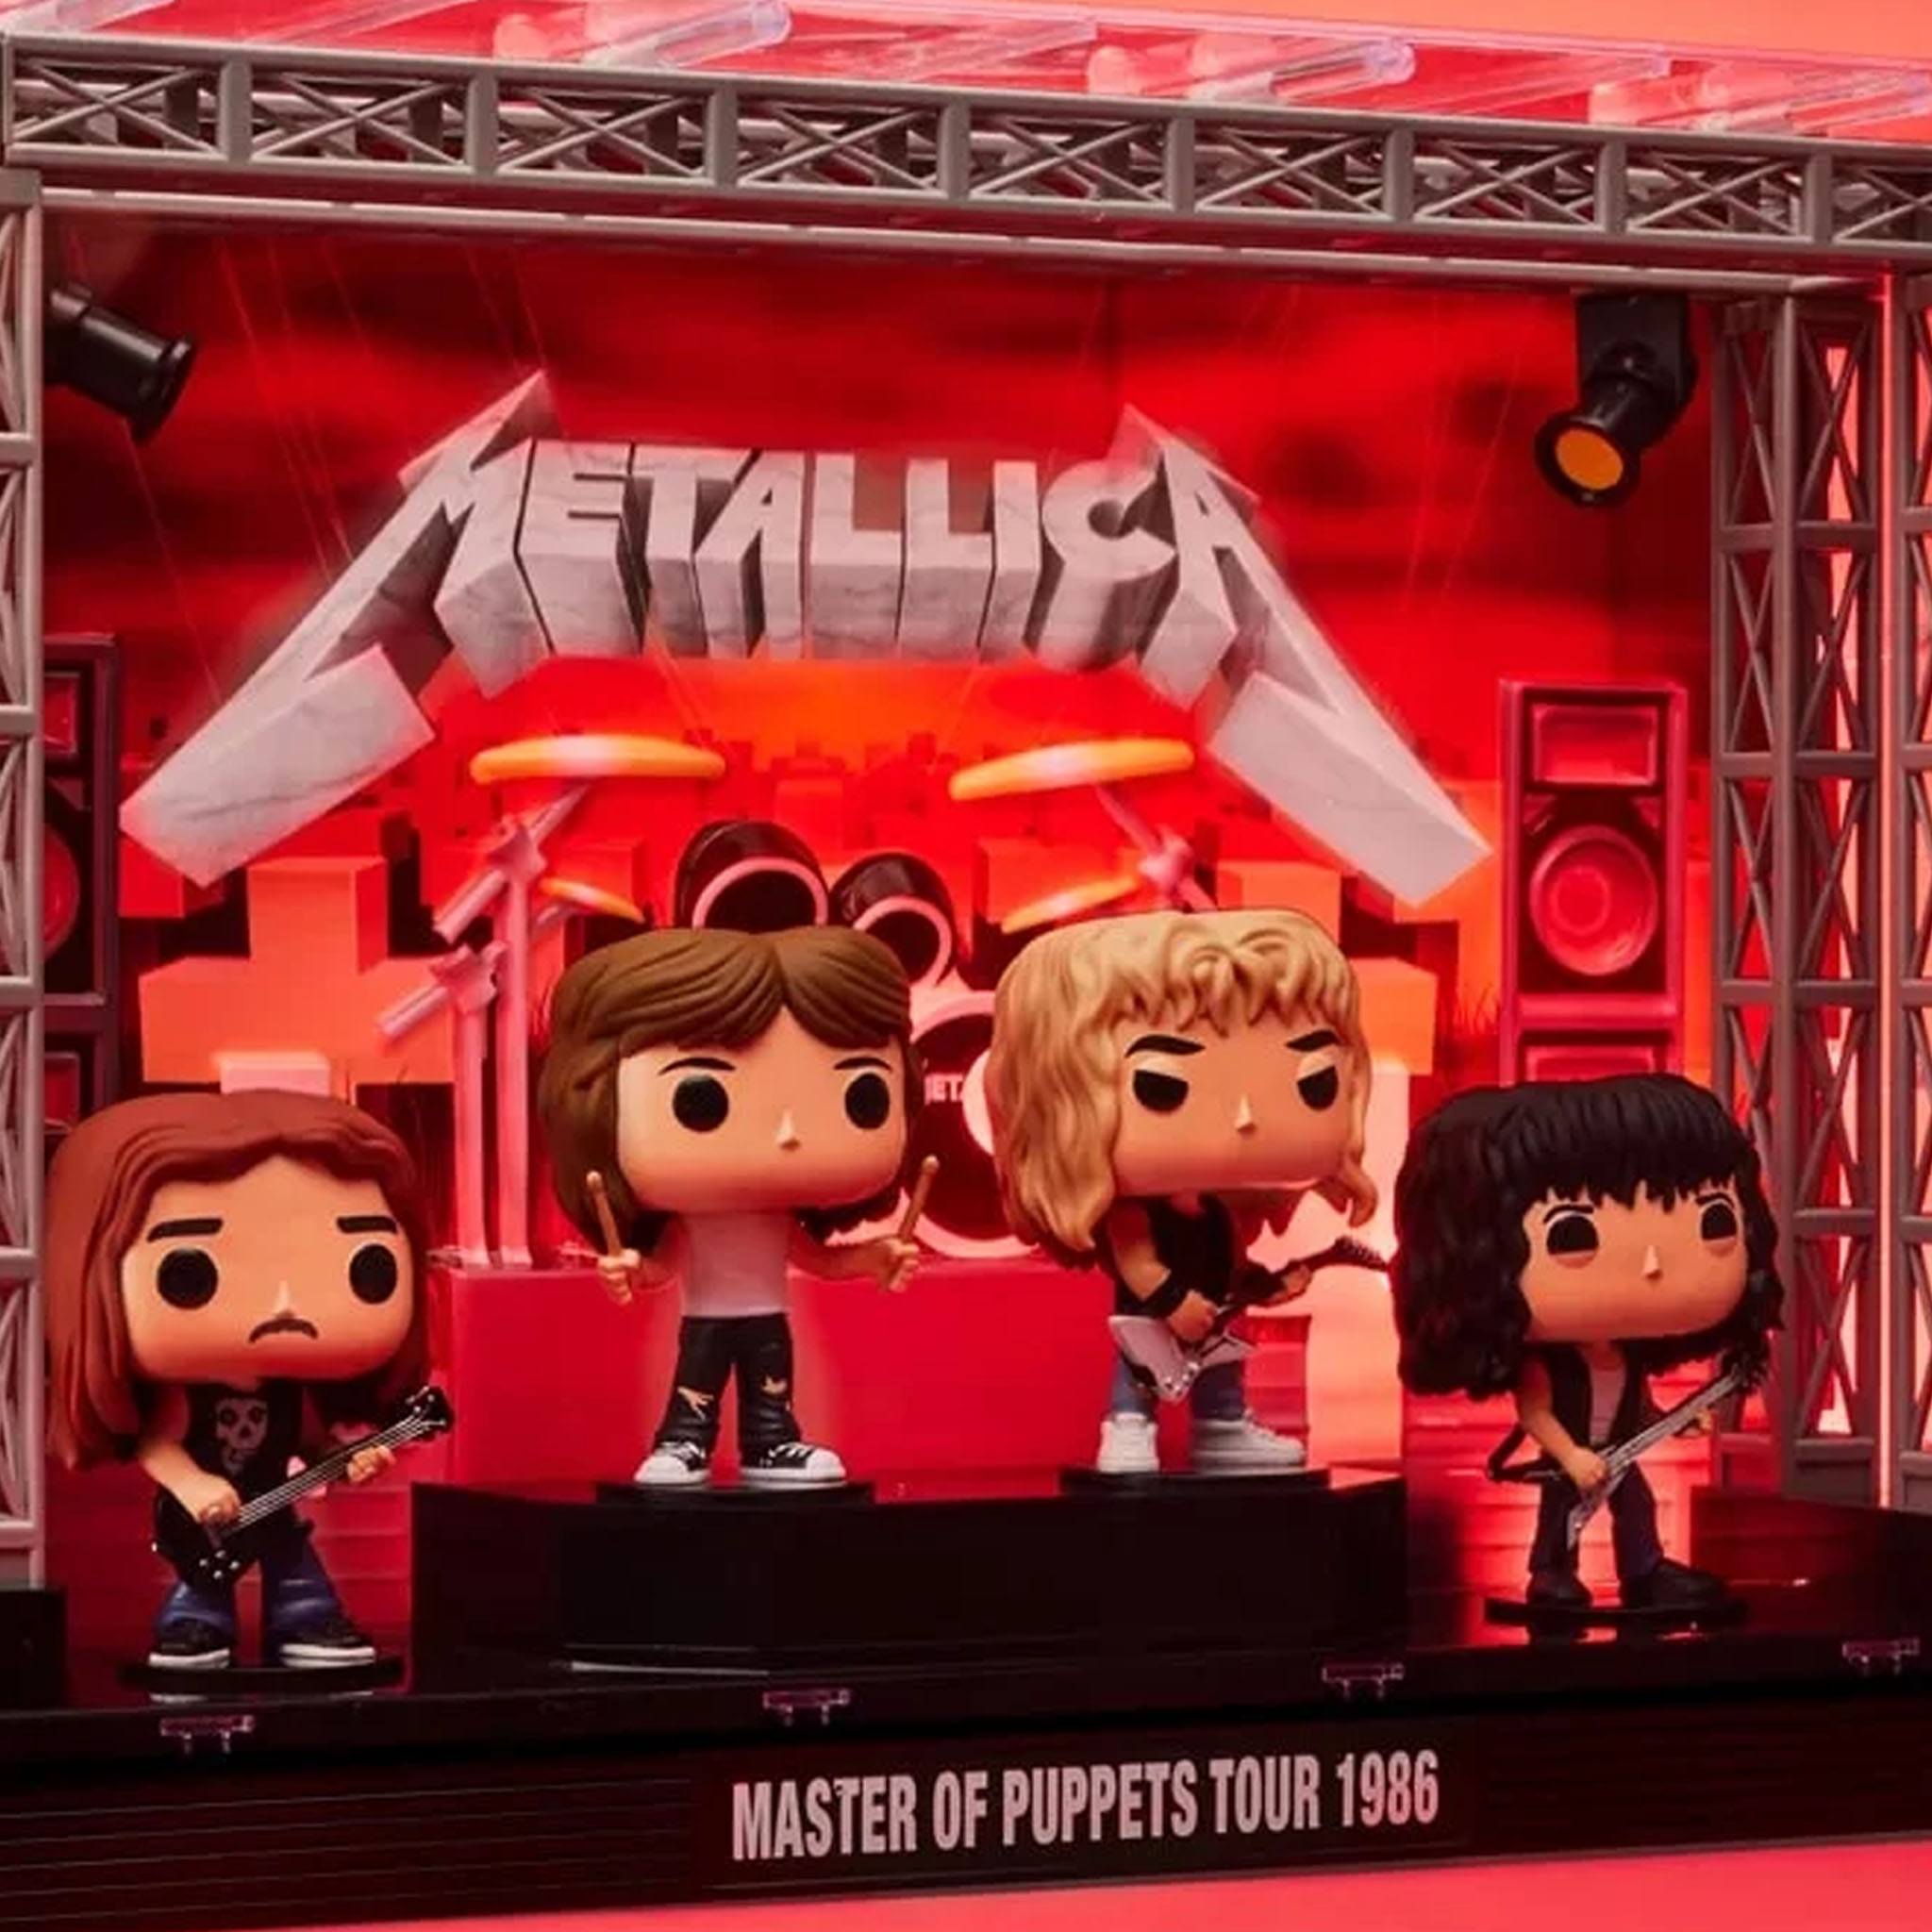 Funko revives Metallica's 1986 Master of Puppets Tour